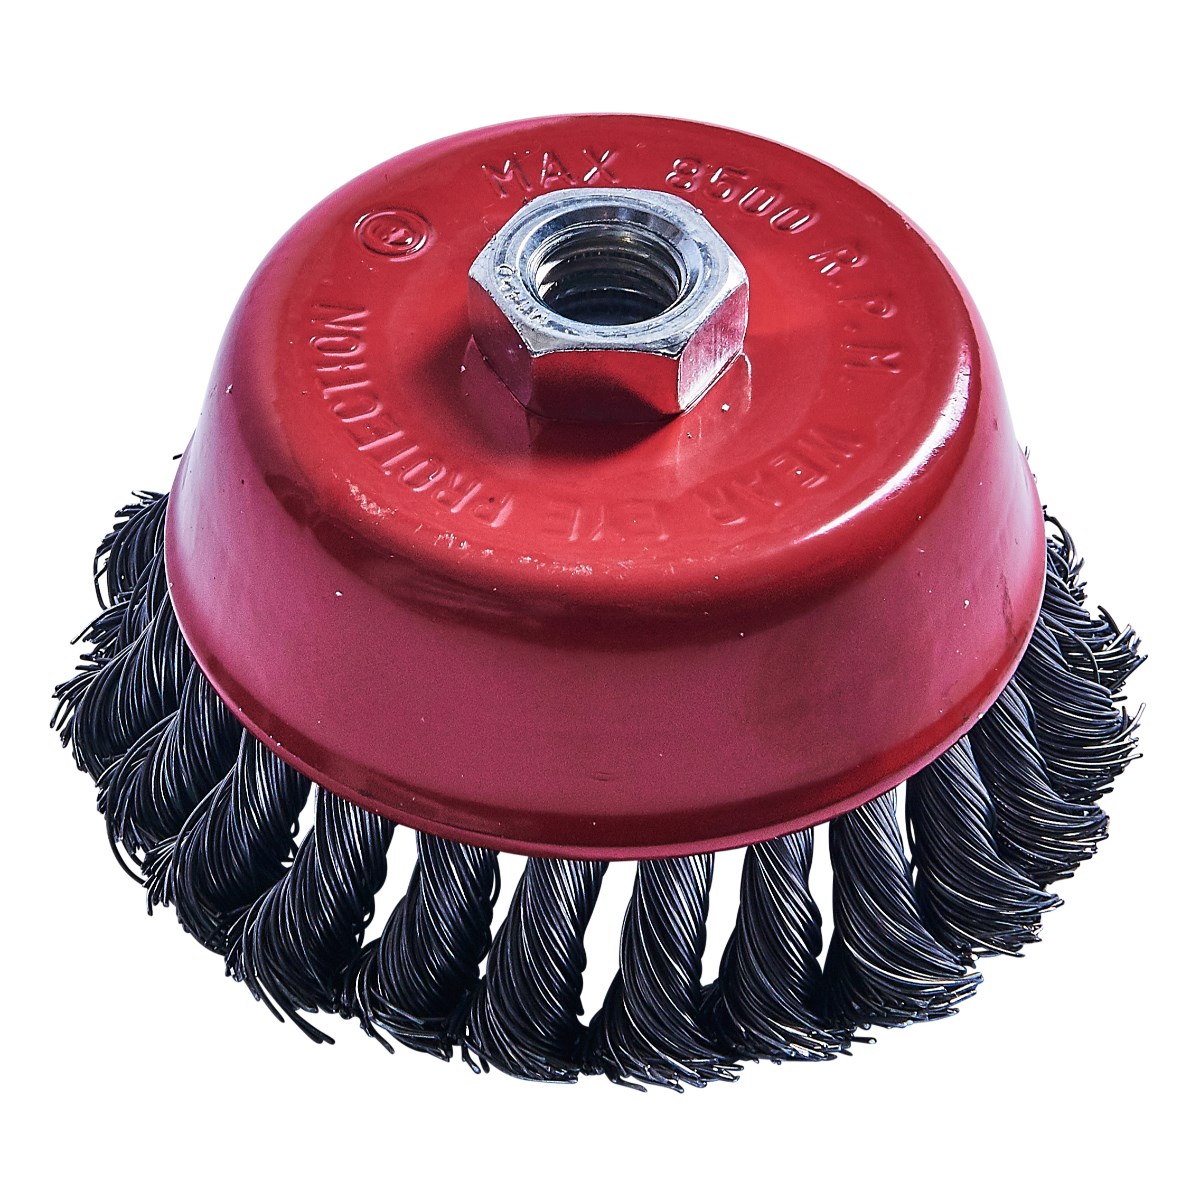 4 (100mm) twist knot wire cup brush - Amtech